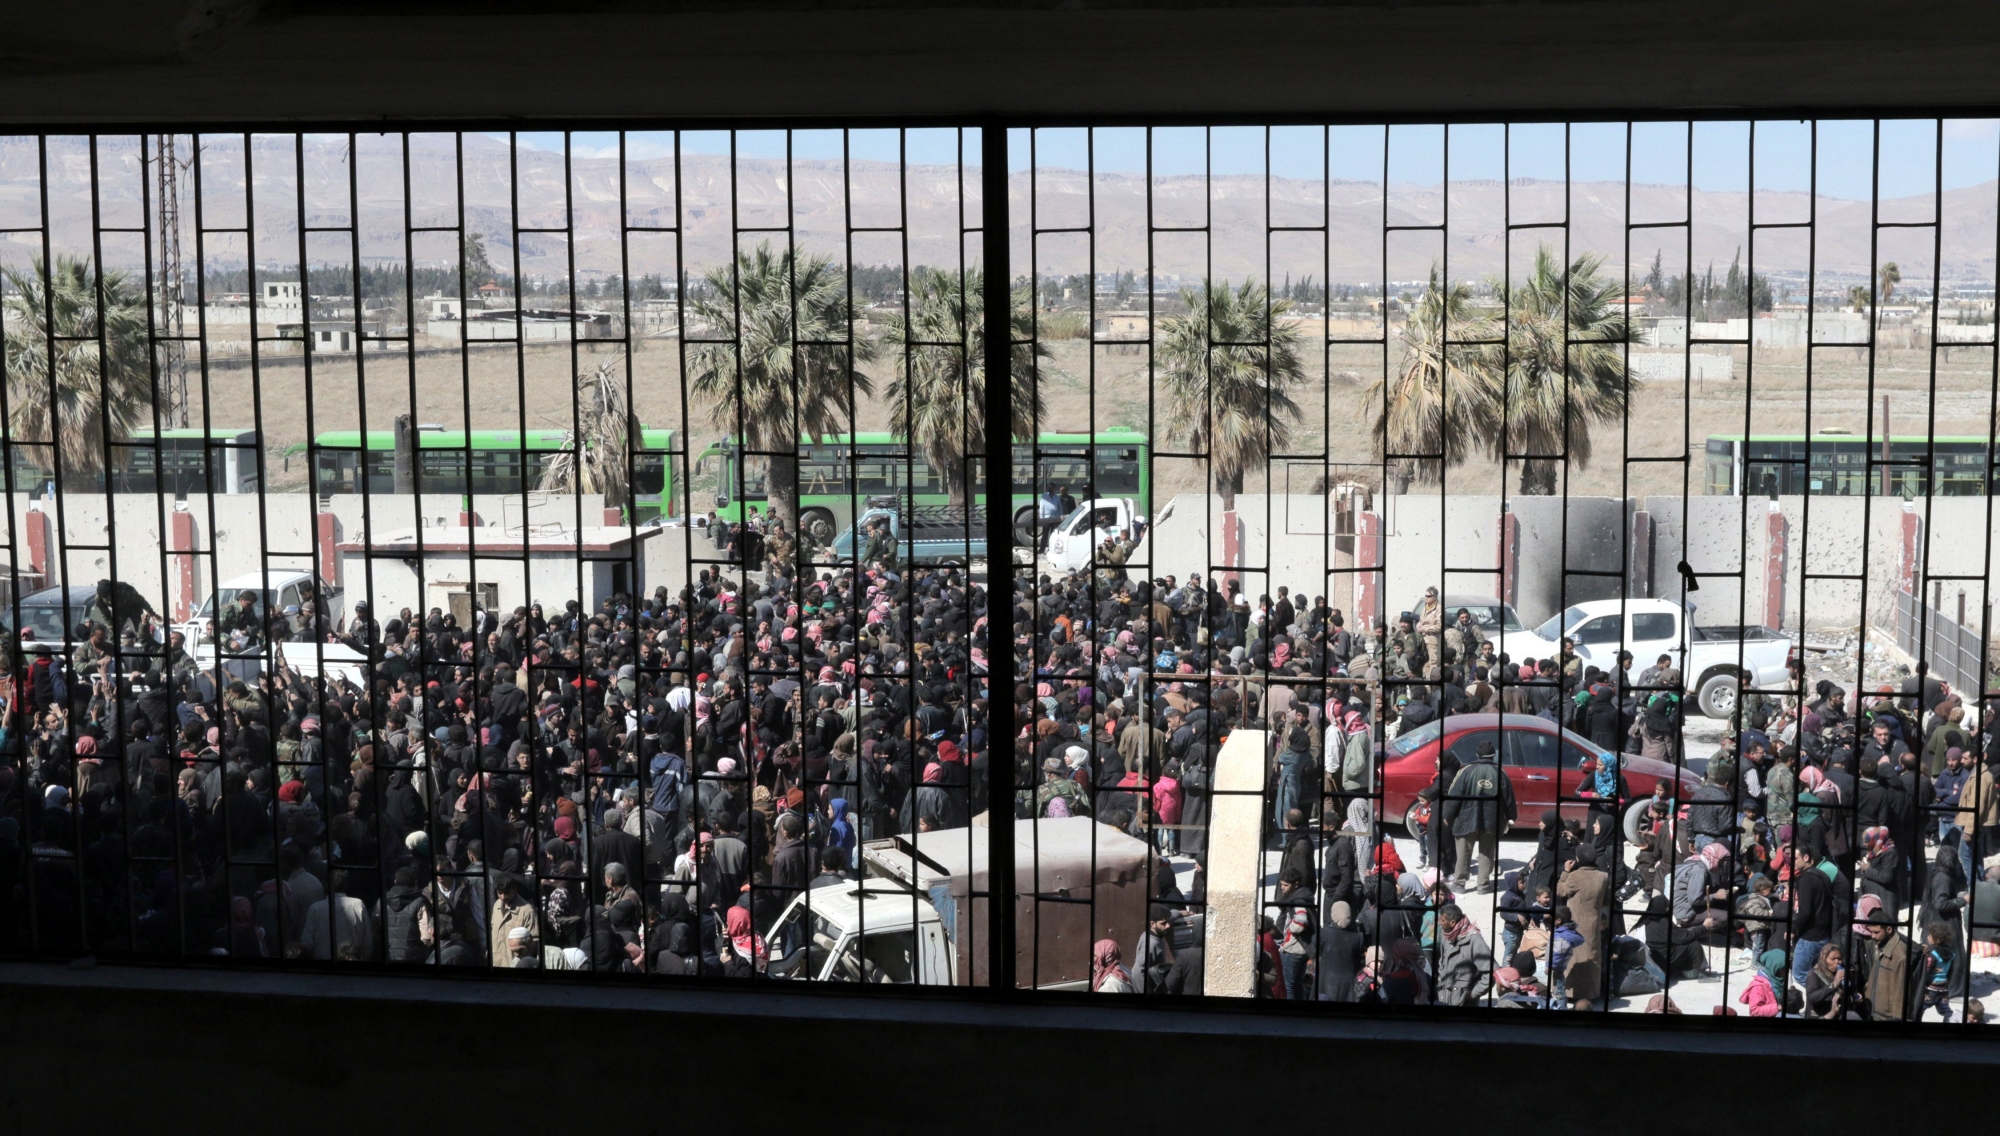 epaselect epa06608241 Hundreds of civilians, who were evacuated from the Eastern Ghouta, wait for buses to transport them for nearby makeshift centers, at Housh Nasri area, outskirts of Damascus, Syria, 16 March 2018. According to media reports, the Syrian army and the Syrian Arab Red Crescent (SARC) evacuated the civilians via Hamoria corridor. The reports said that the Syrian army has recaptured around 70 percent of Eastern Ghouta since the start of the military offensive. On 19 February 2018 the Syrian government started a military campaign to regain control of rebels-held Eastern Ghouta in Damascus's countryside. Around 1500 civilians were killed according to local reports.  EPA/YOUSSEF BADAWI epaselect SYRIA CONFLICT EASTERN GHOUTA EVACUATION